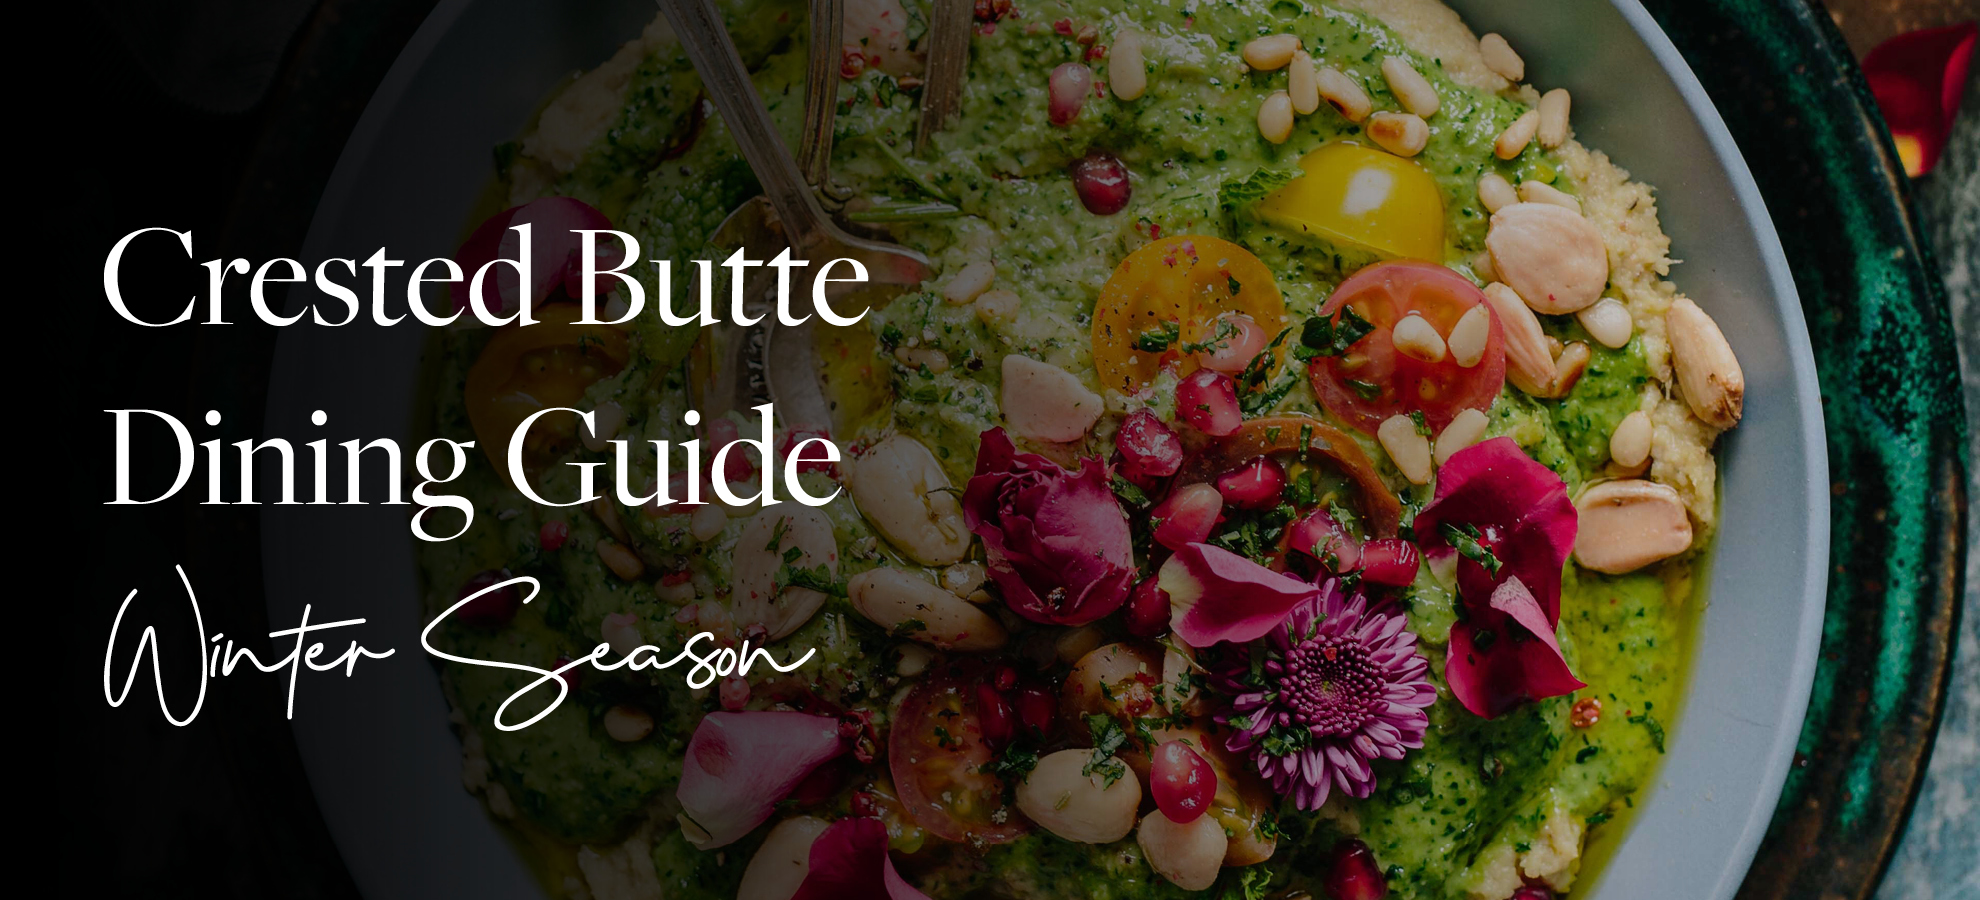 Crested Butte Dining Guide | Where To Eat During Winter Season